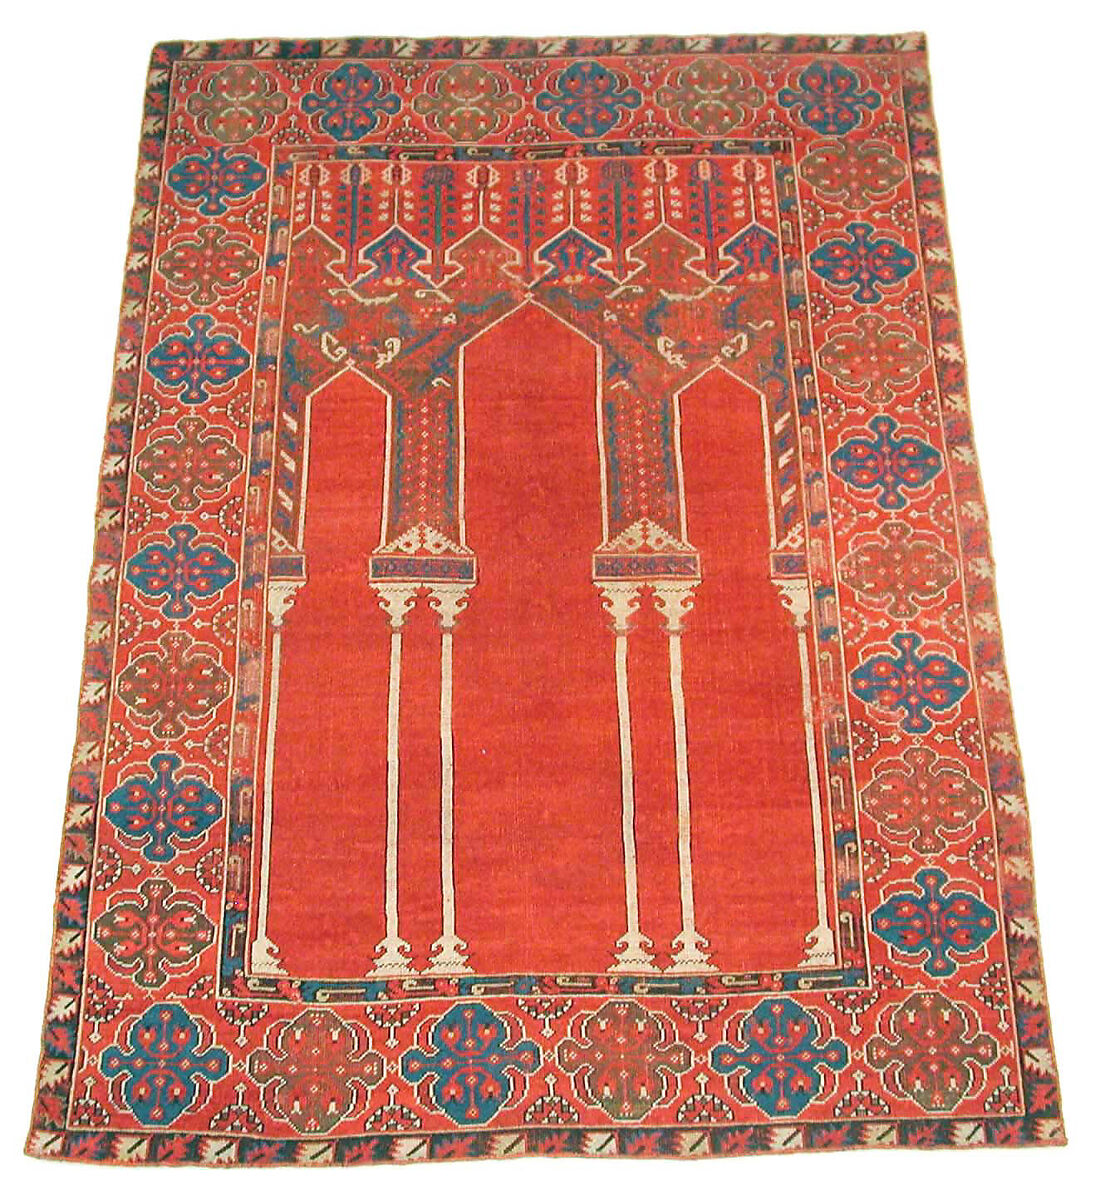 Prayer Rug with Triple Arch Design, Wool (warp, weft, and pile); symmetrically knotted pile